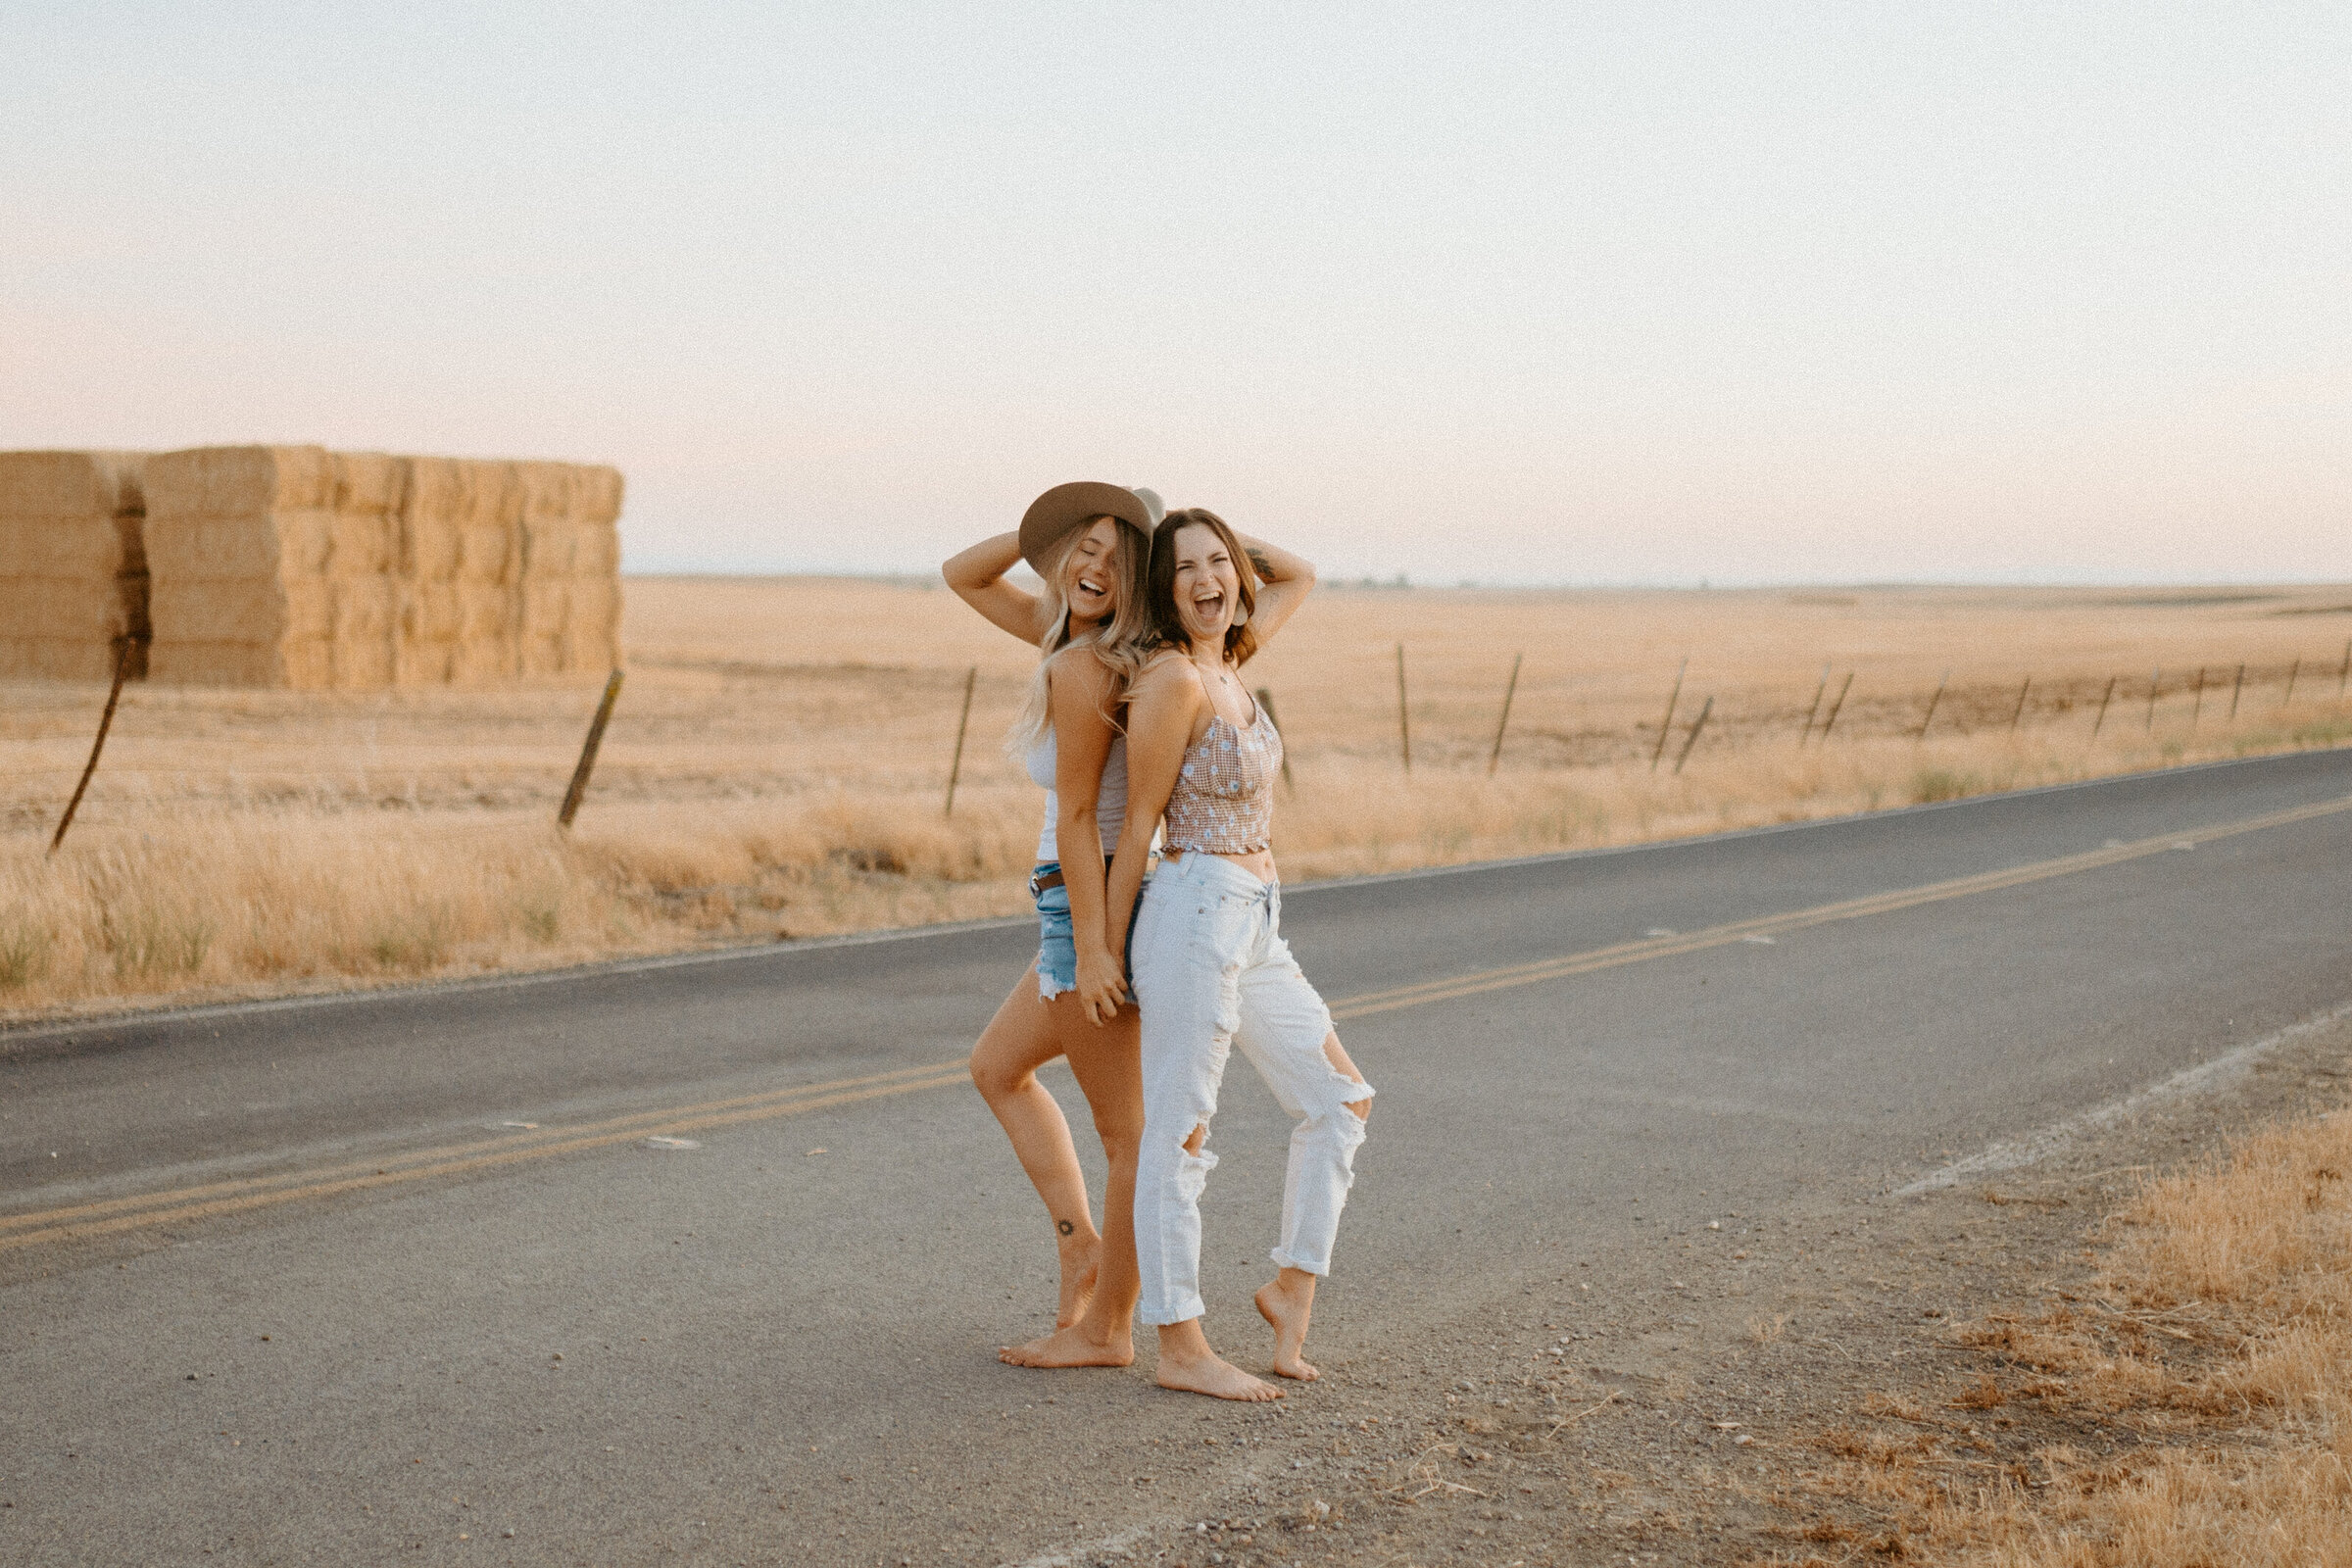 Flood Road Rustic Countryside Content Session - Escalon CA - McKenna Payne Photography62